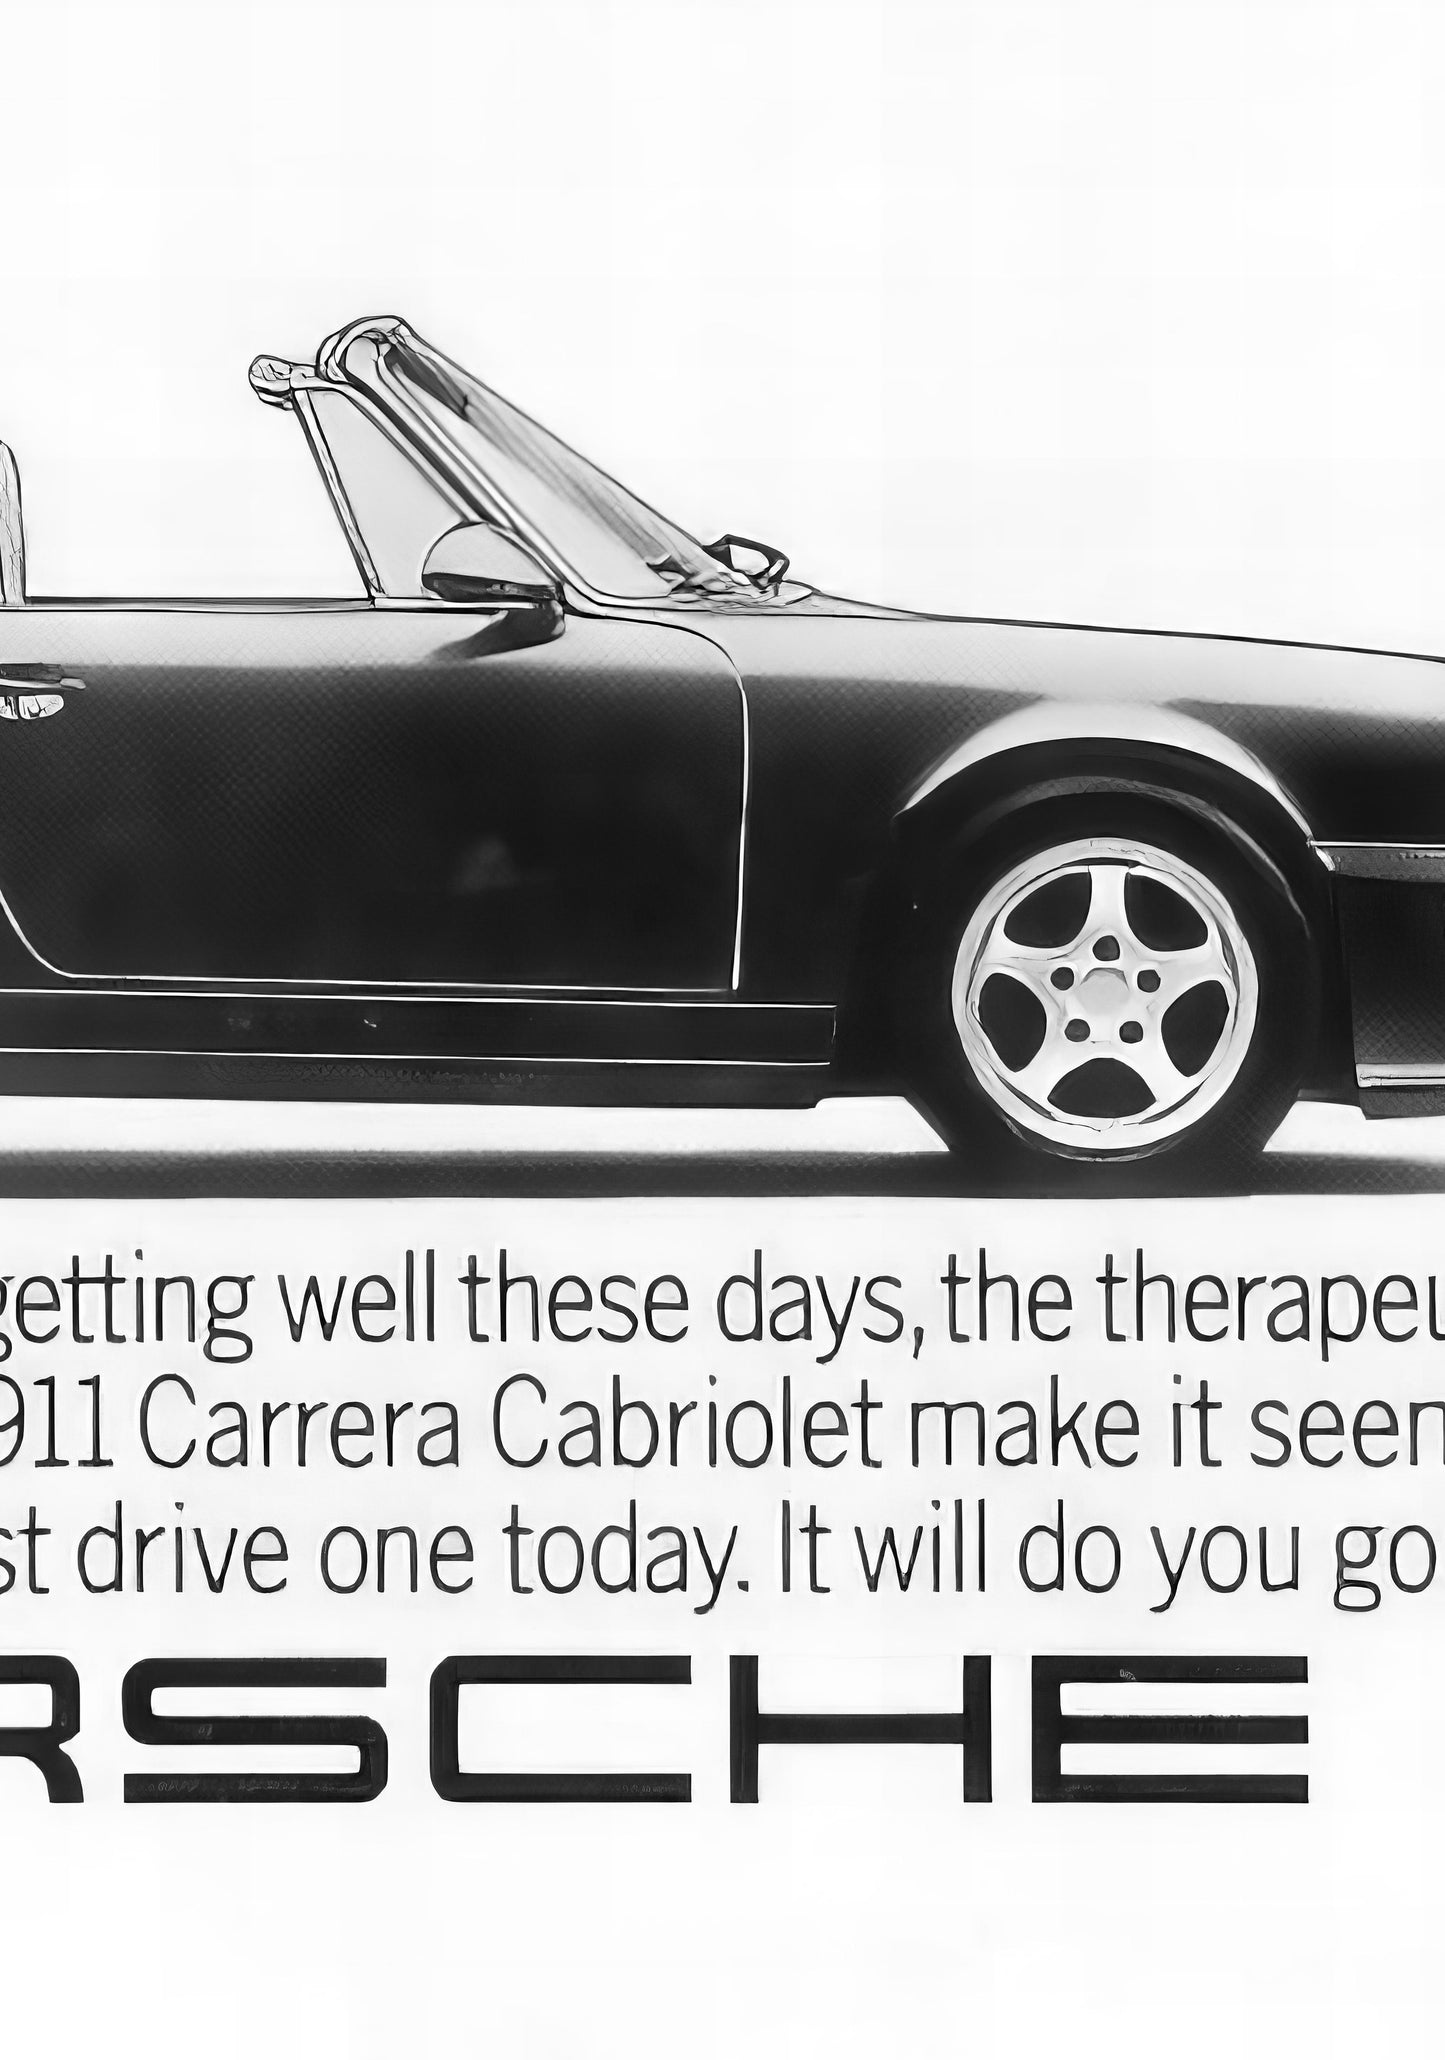 Porsche 911 "Didn't Your Doctor Tell You To Get More Fresh Air?" Poster